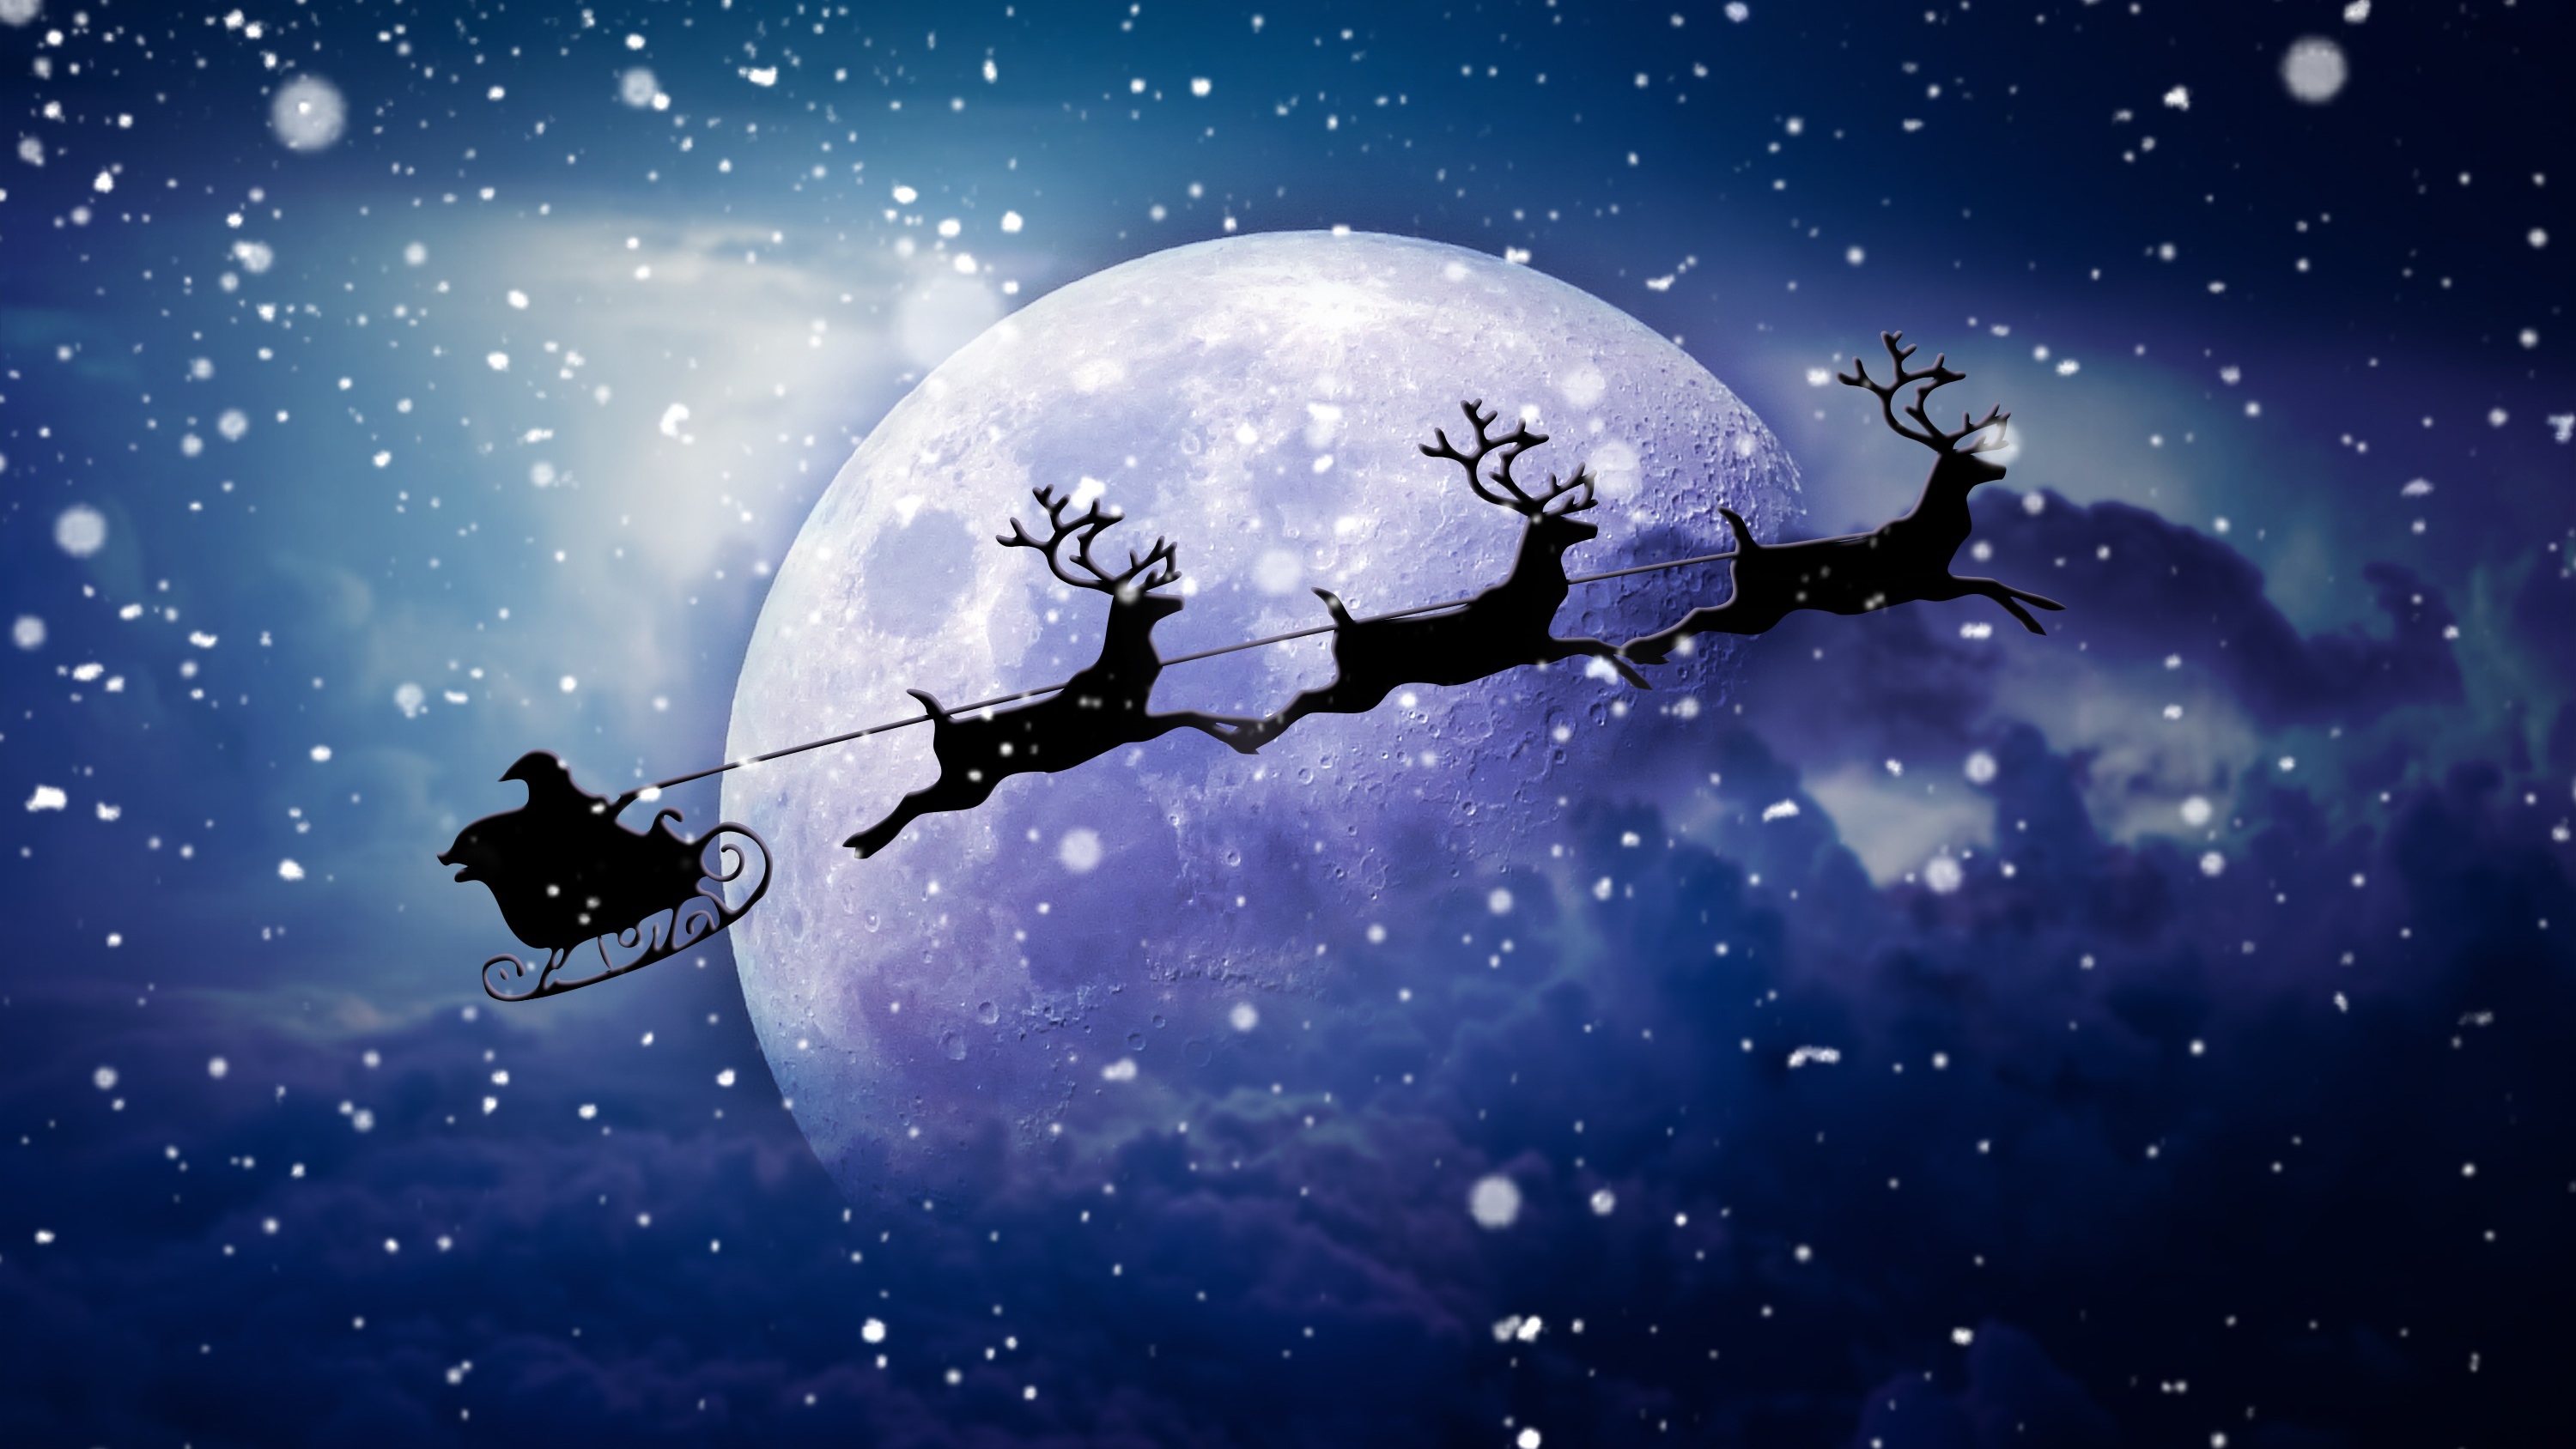 Free photo Wallpaper silhouette of santa claus with reindeer on moon background